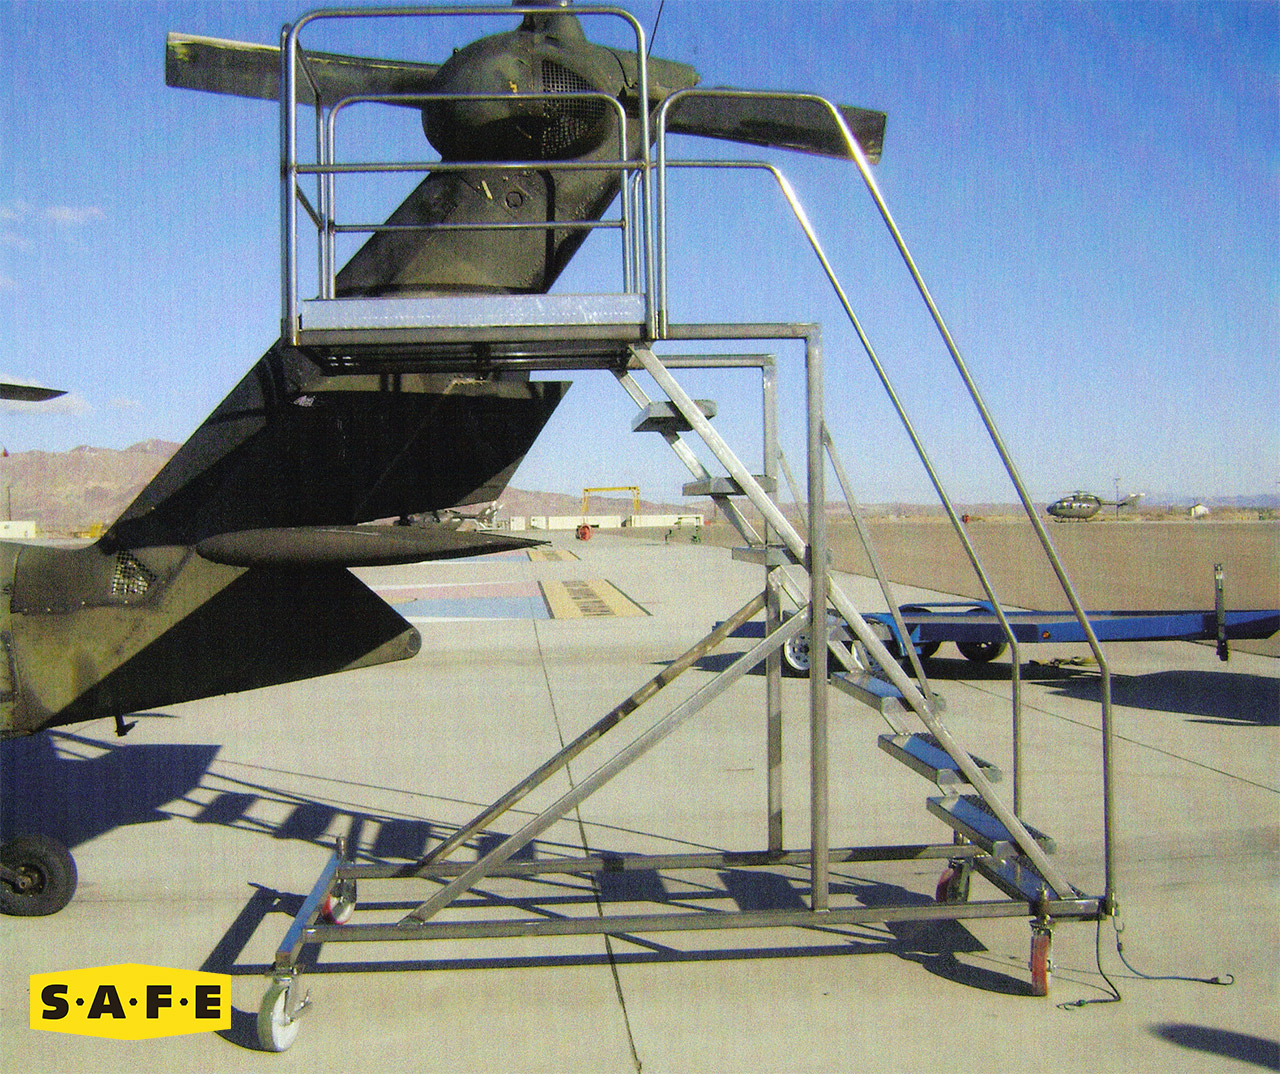 Sikorsky Rotor Wing Aircraft Maintenance Platforms - SAFE Structure Designs1280 x 1074